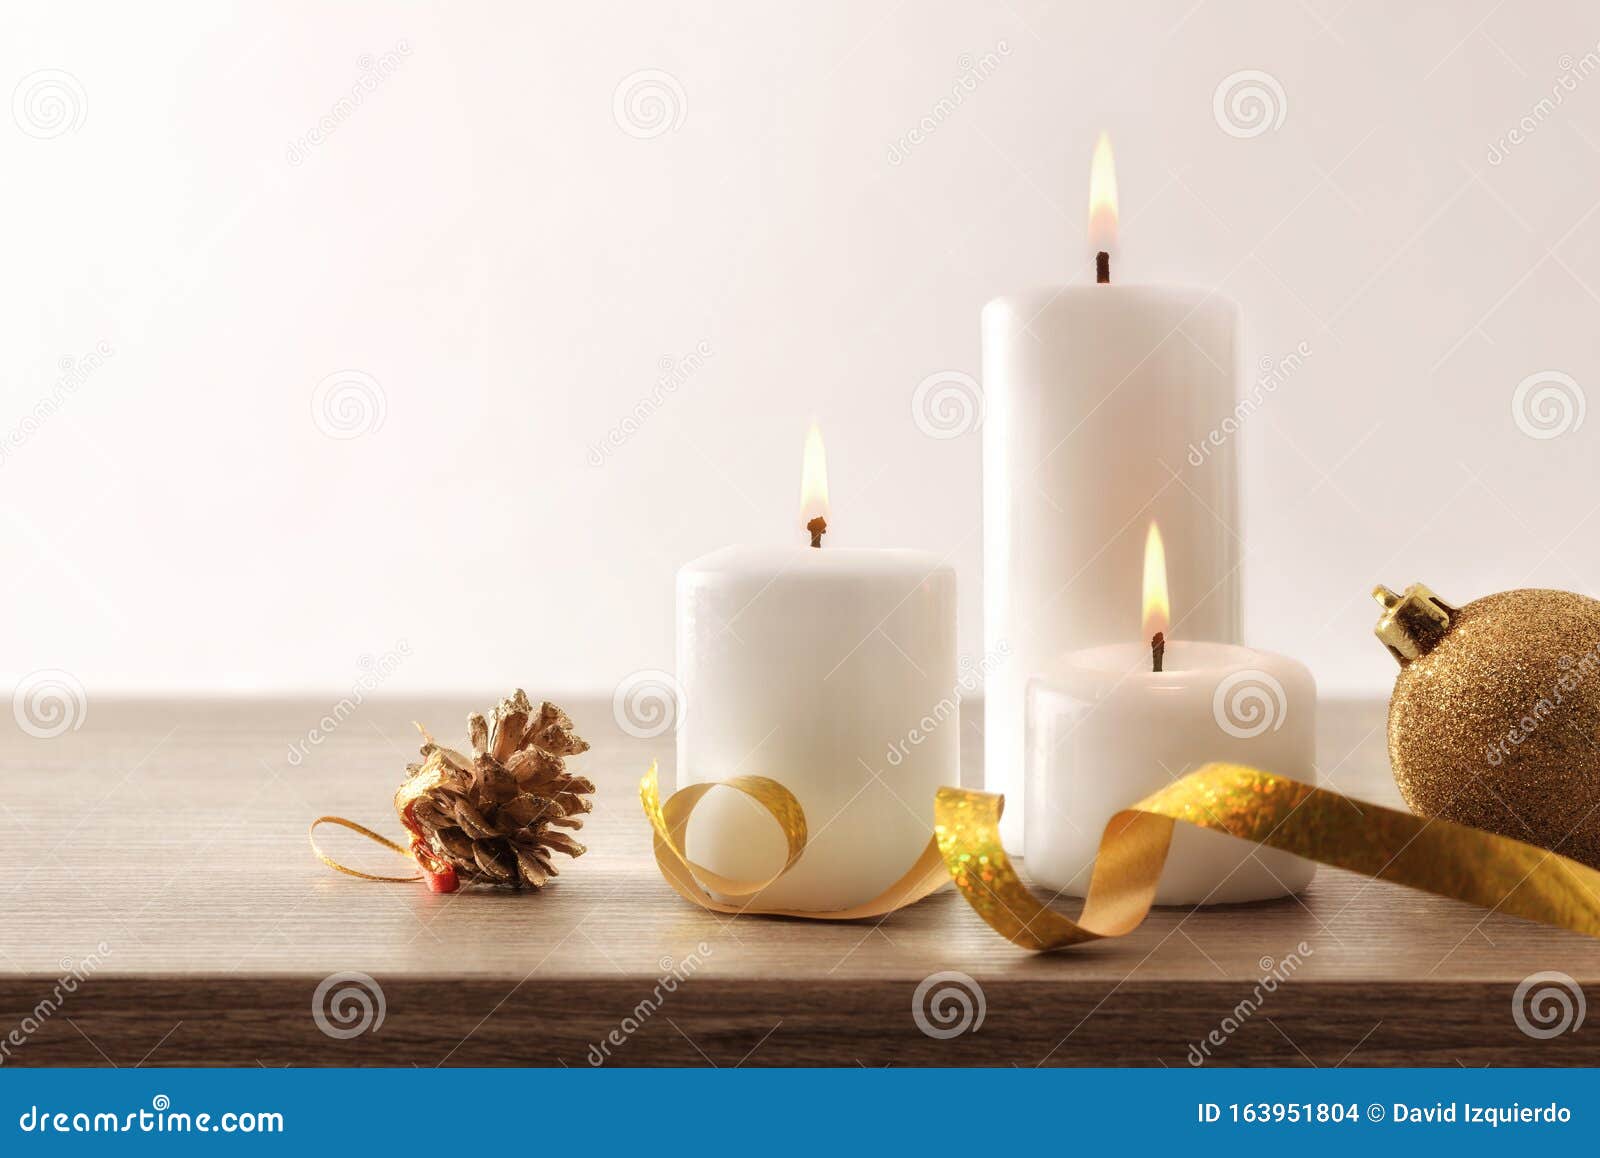 Simple Christmas Composition with Candles and Christmas Elements on ...